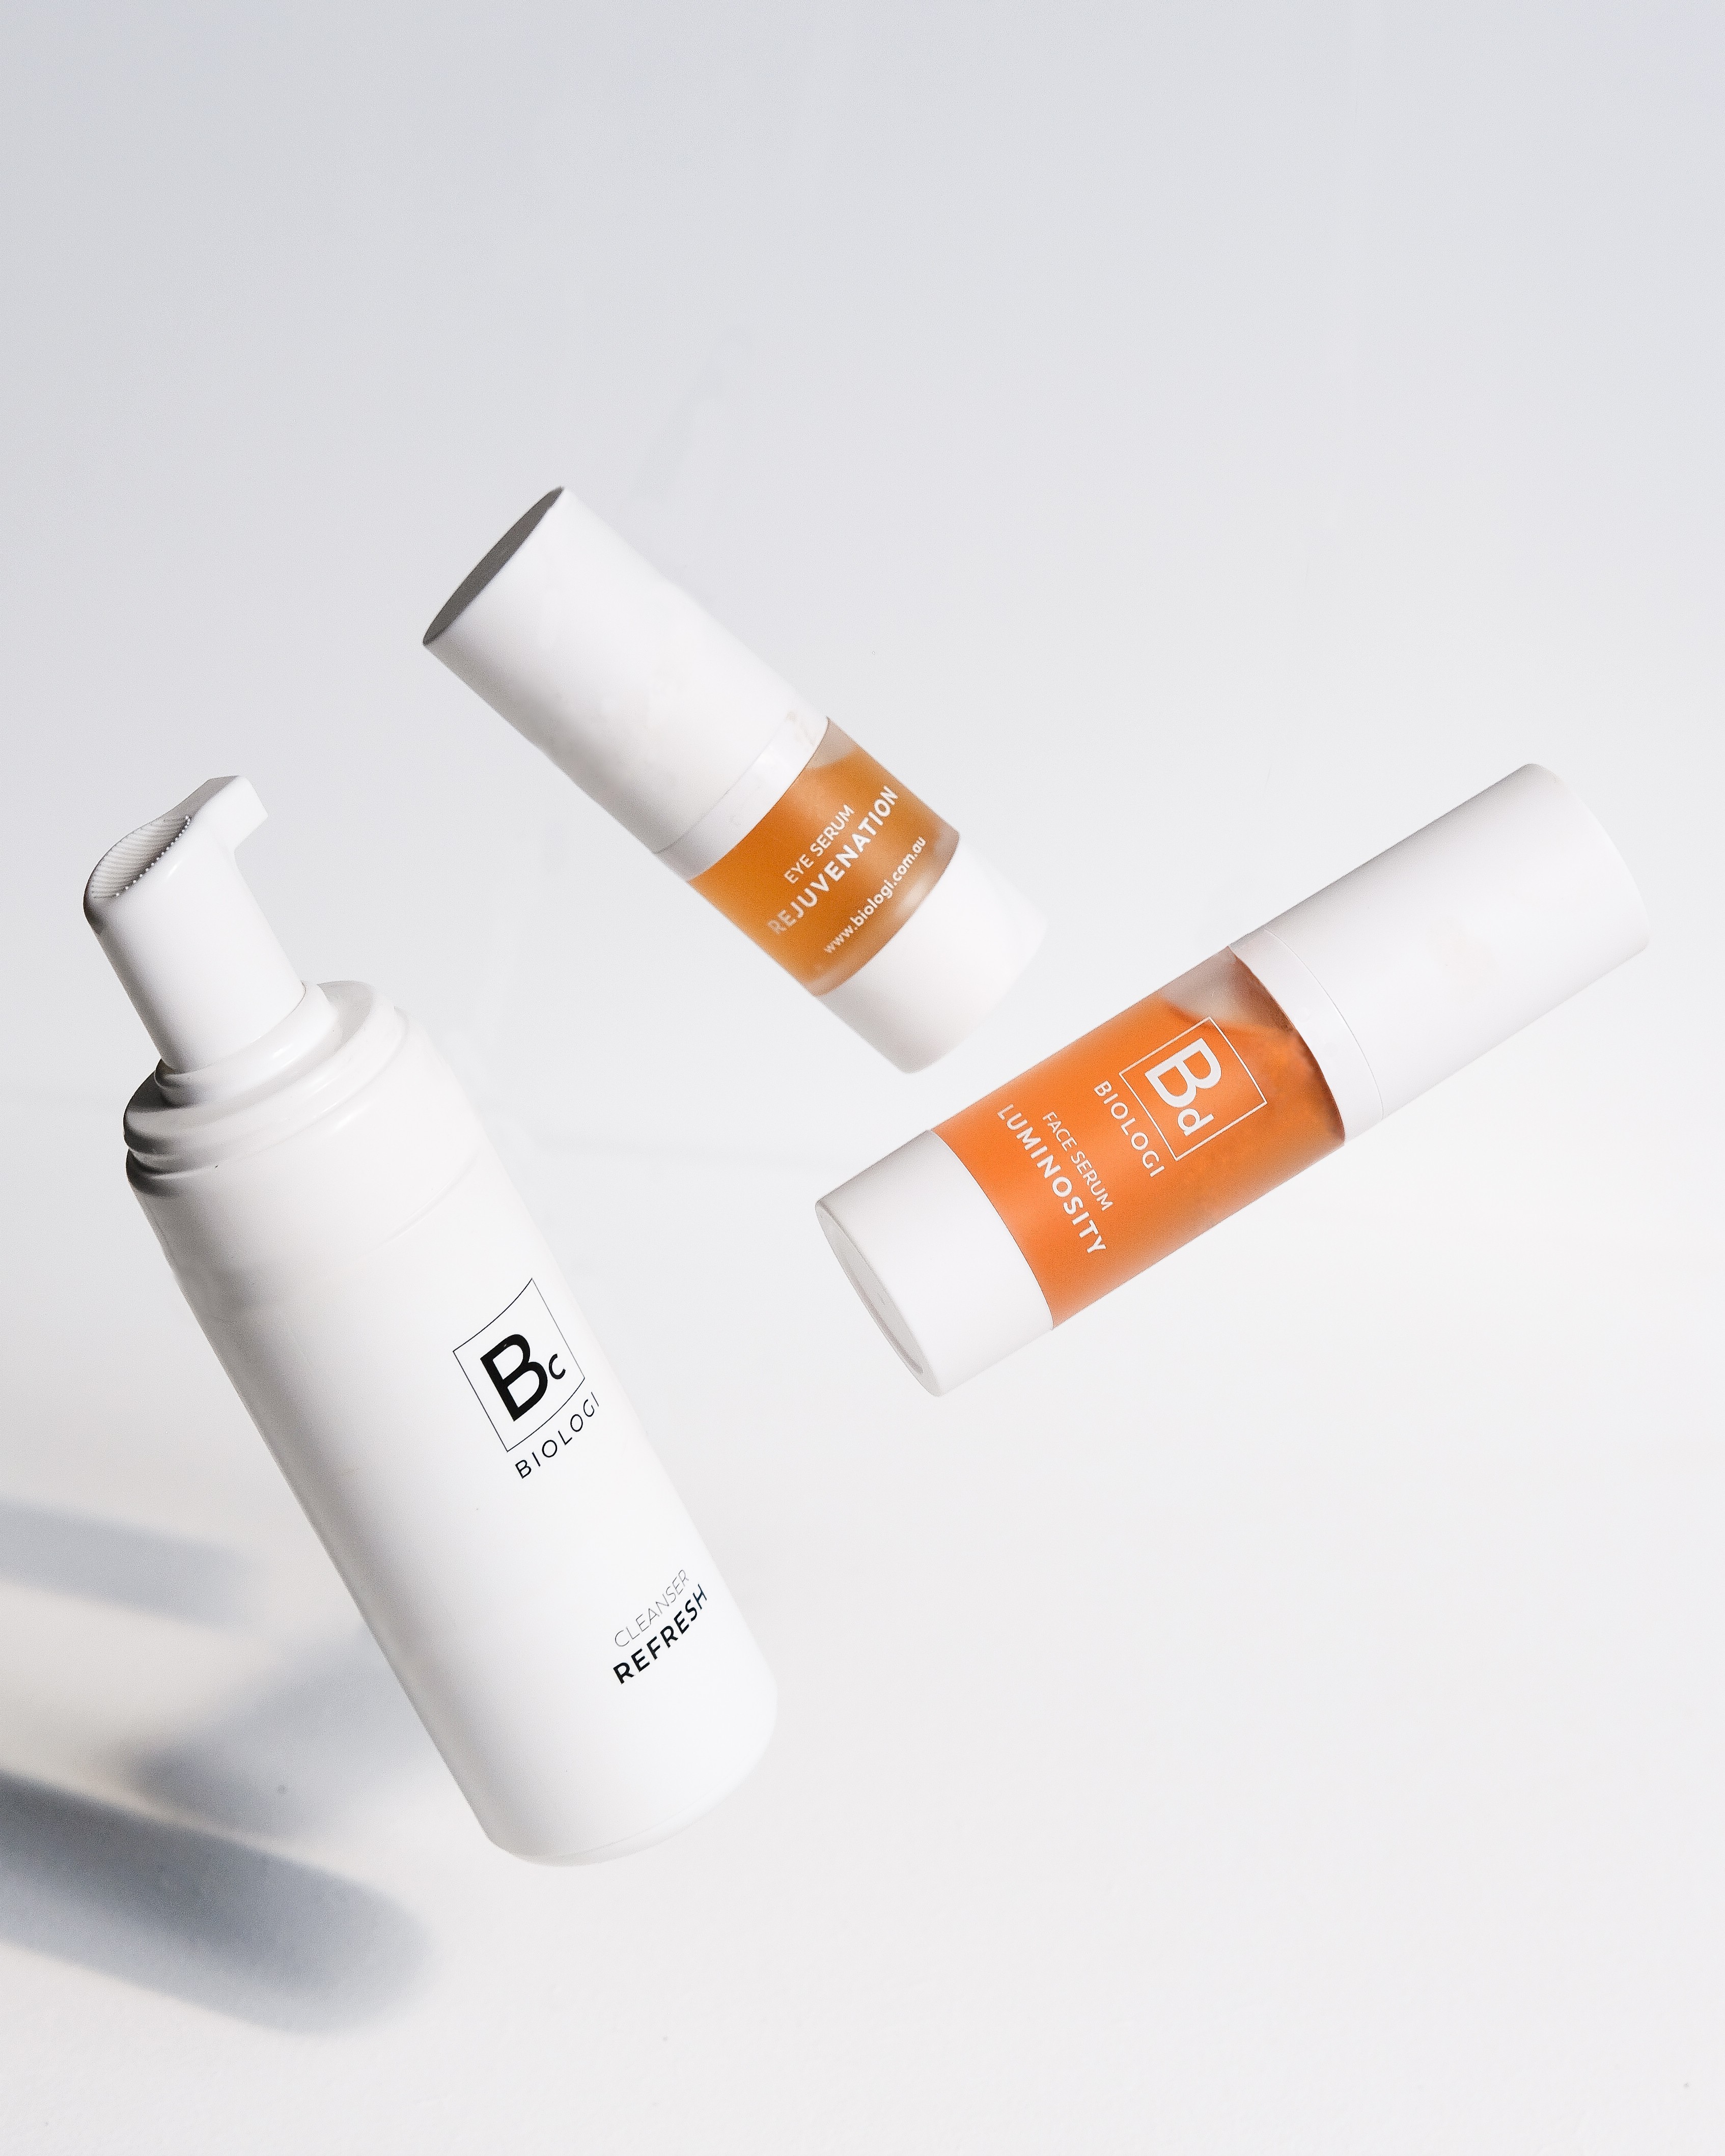 Biologi Product for Every Skin Type - My Hair Care & Beauty